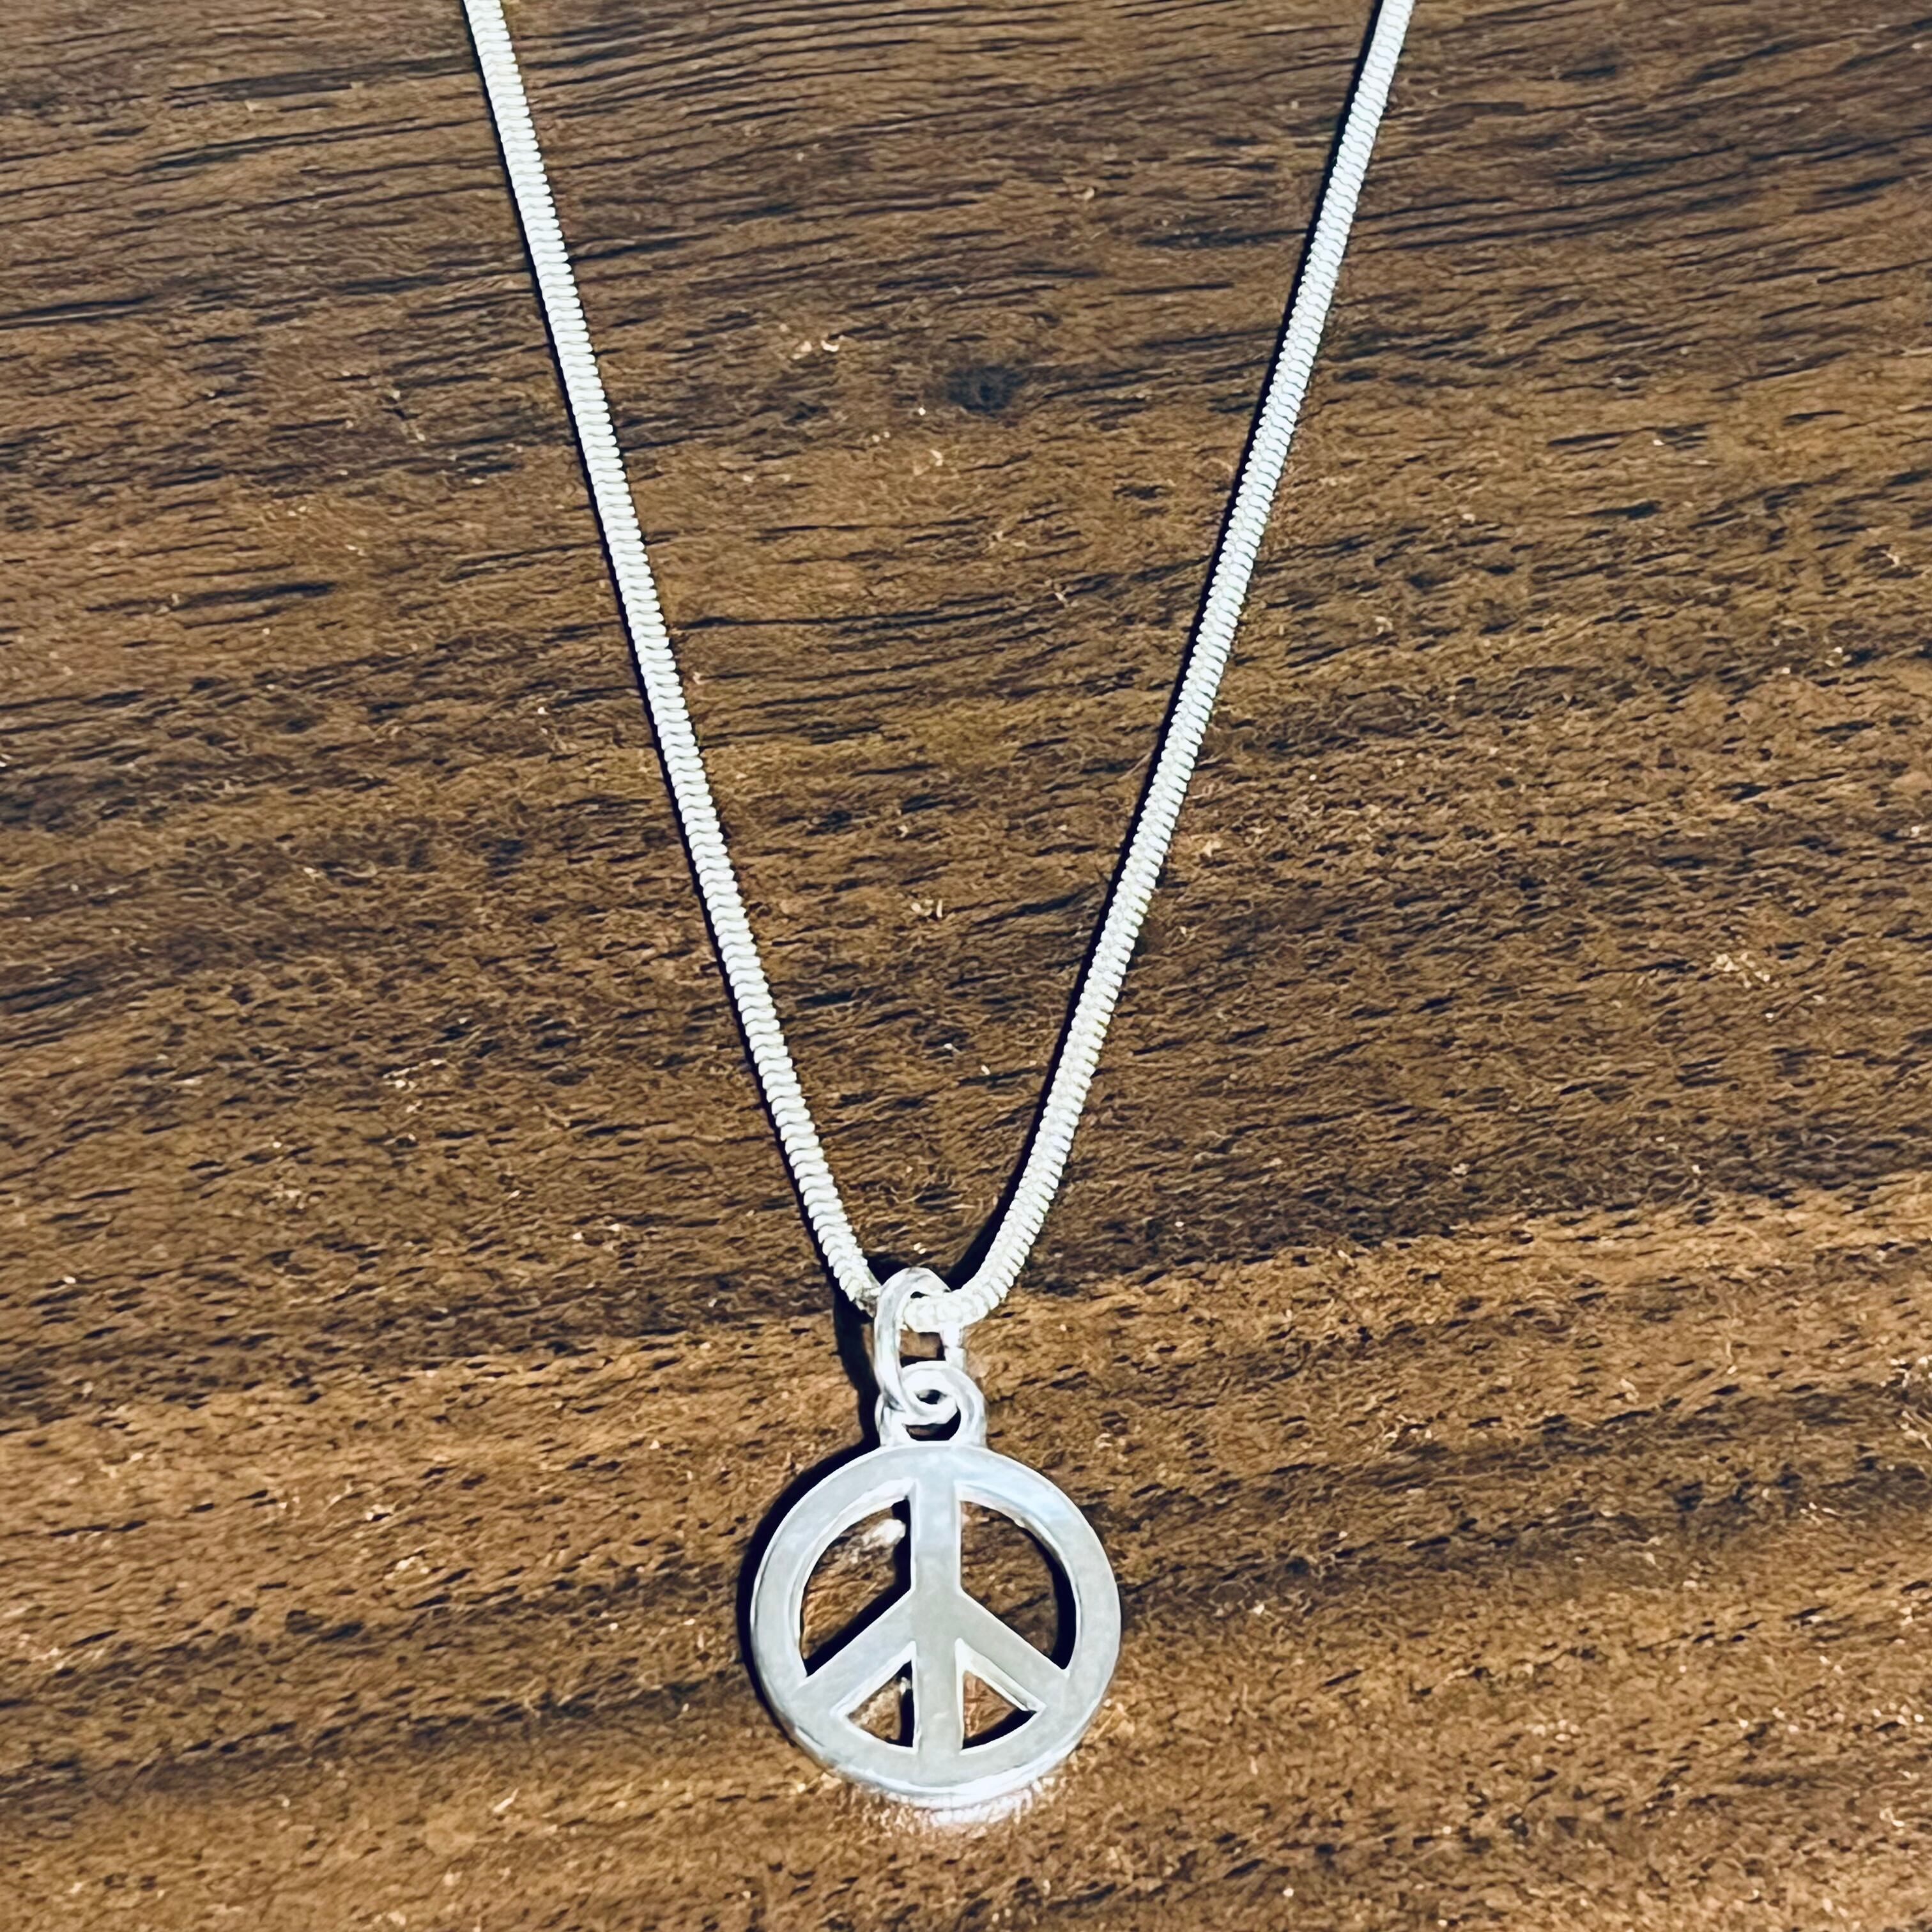 OLD TIFFANY & CO. Peace Sign Charm Necklace Sterling Silver ...